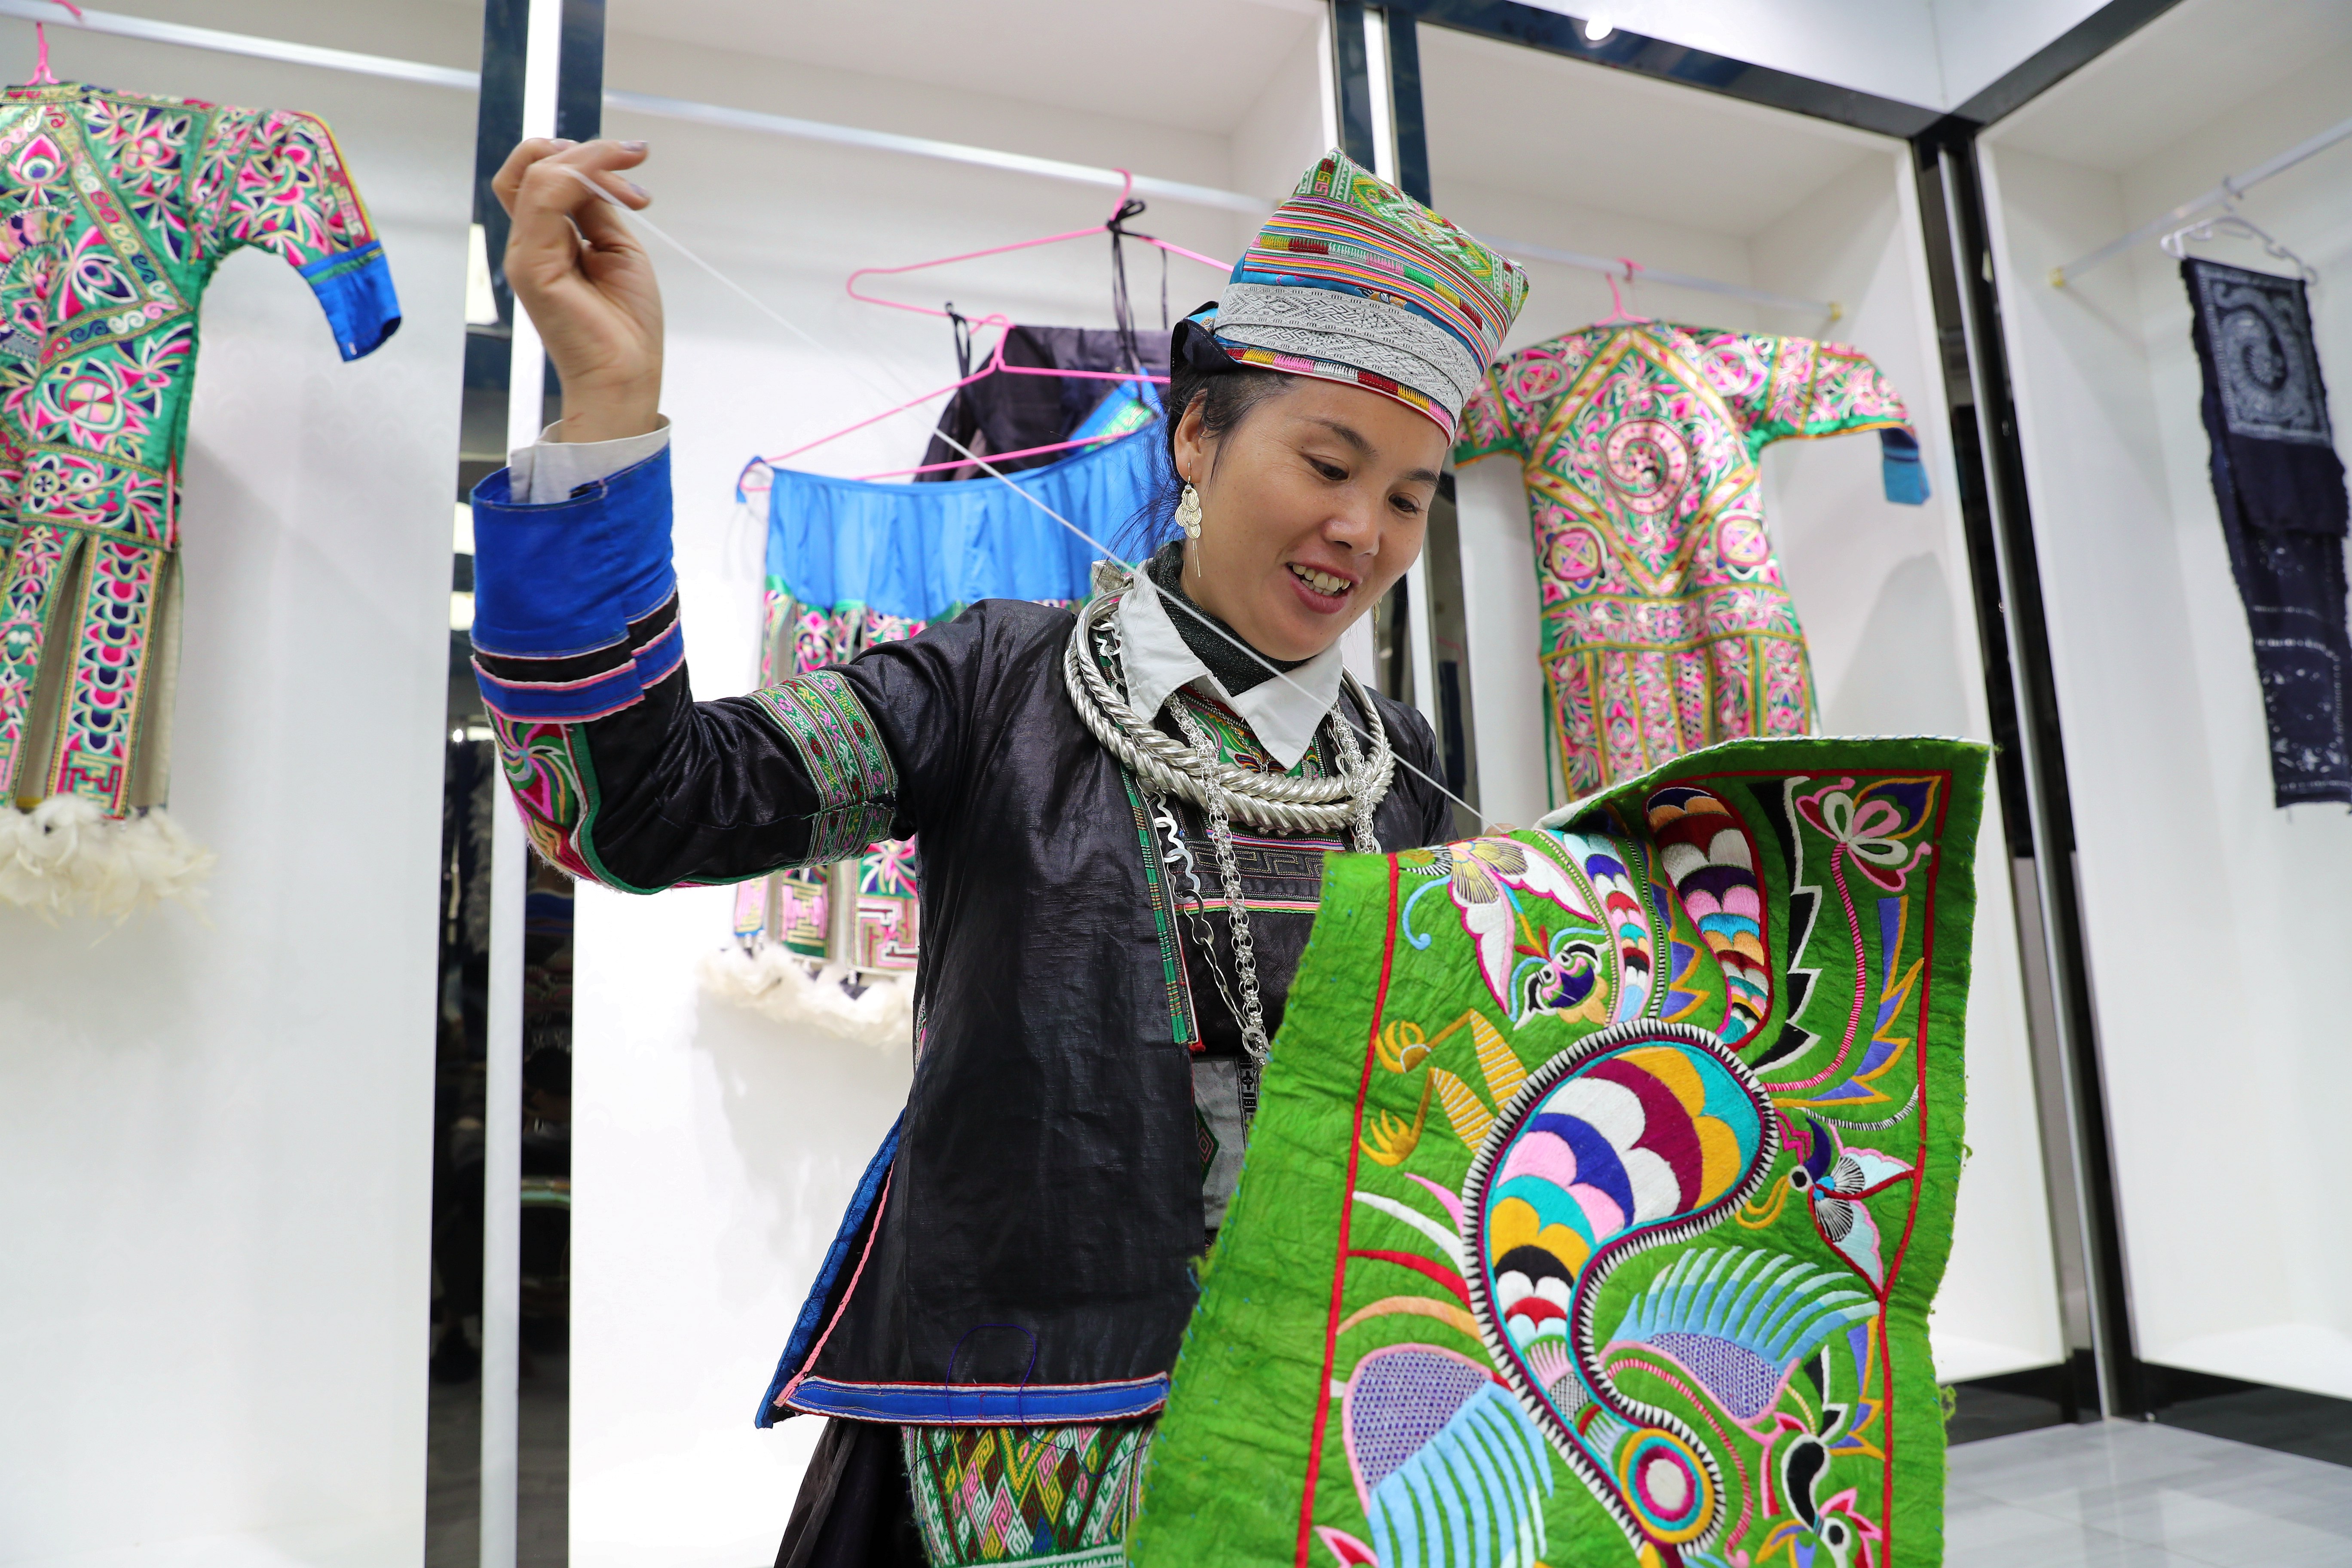 Miao women embroider at the 